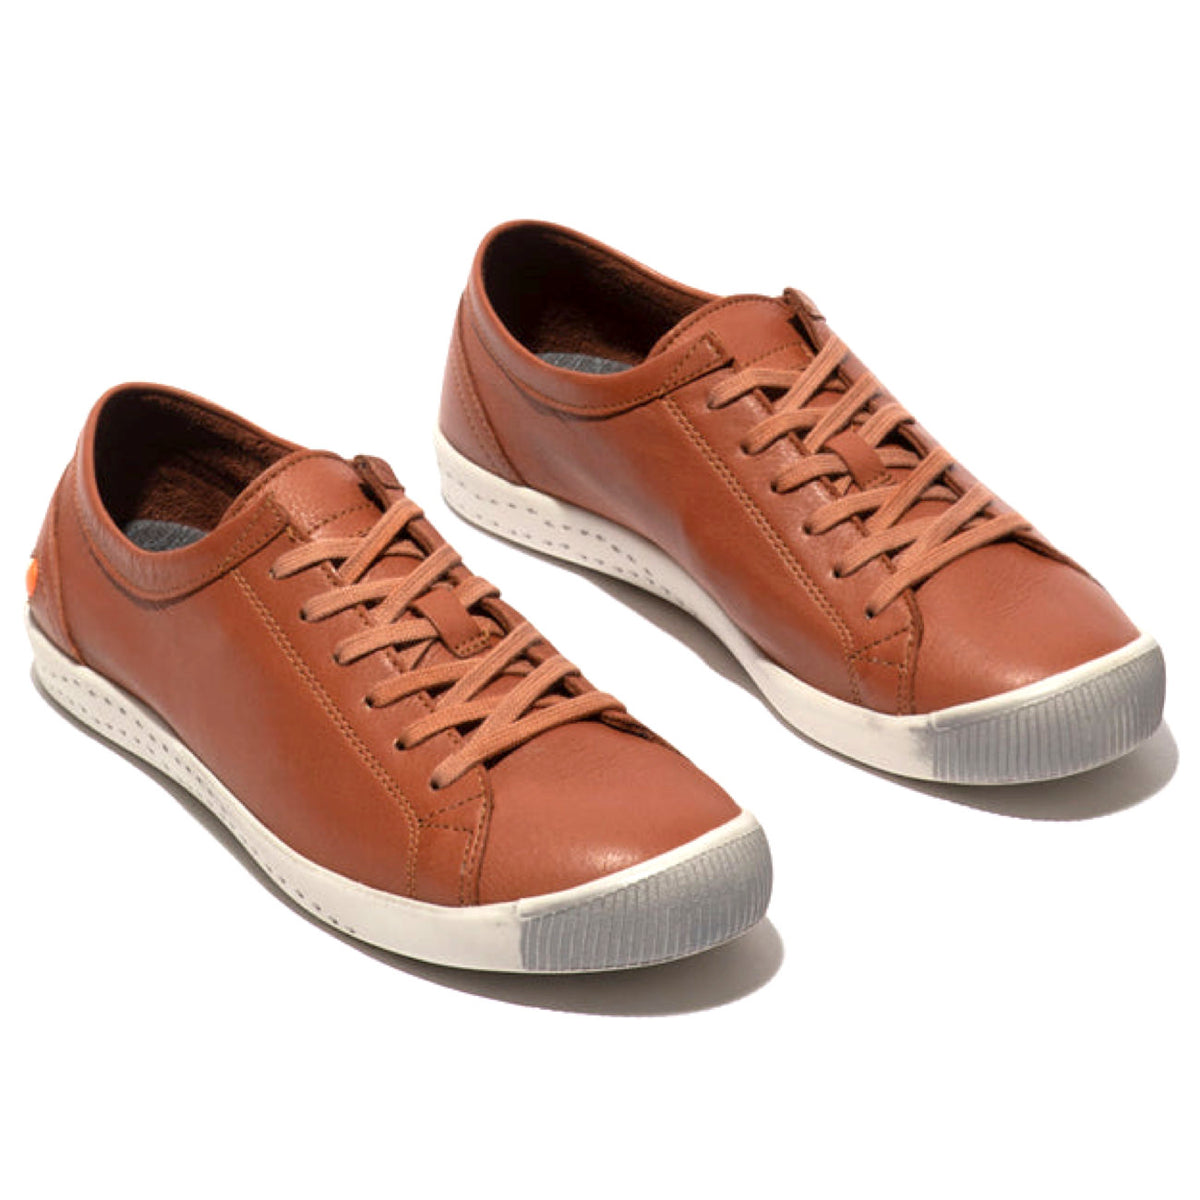 Softinos, Isla154, Laceup Shoe, Washed Leather, Cognac